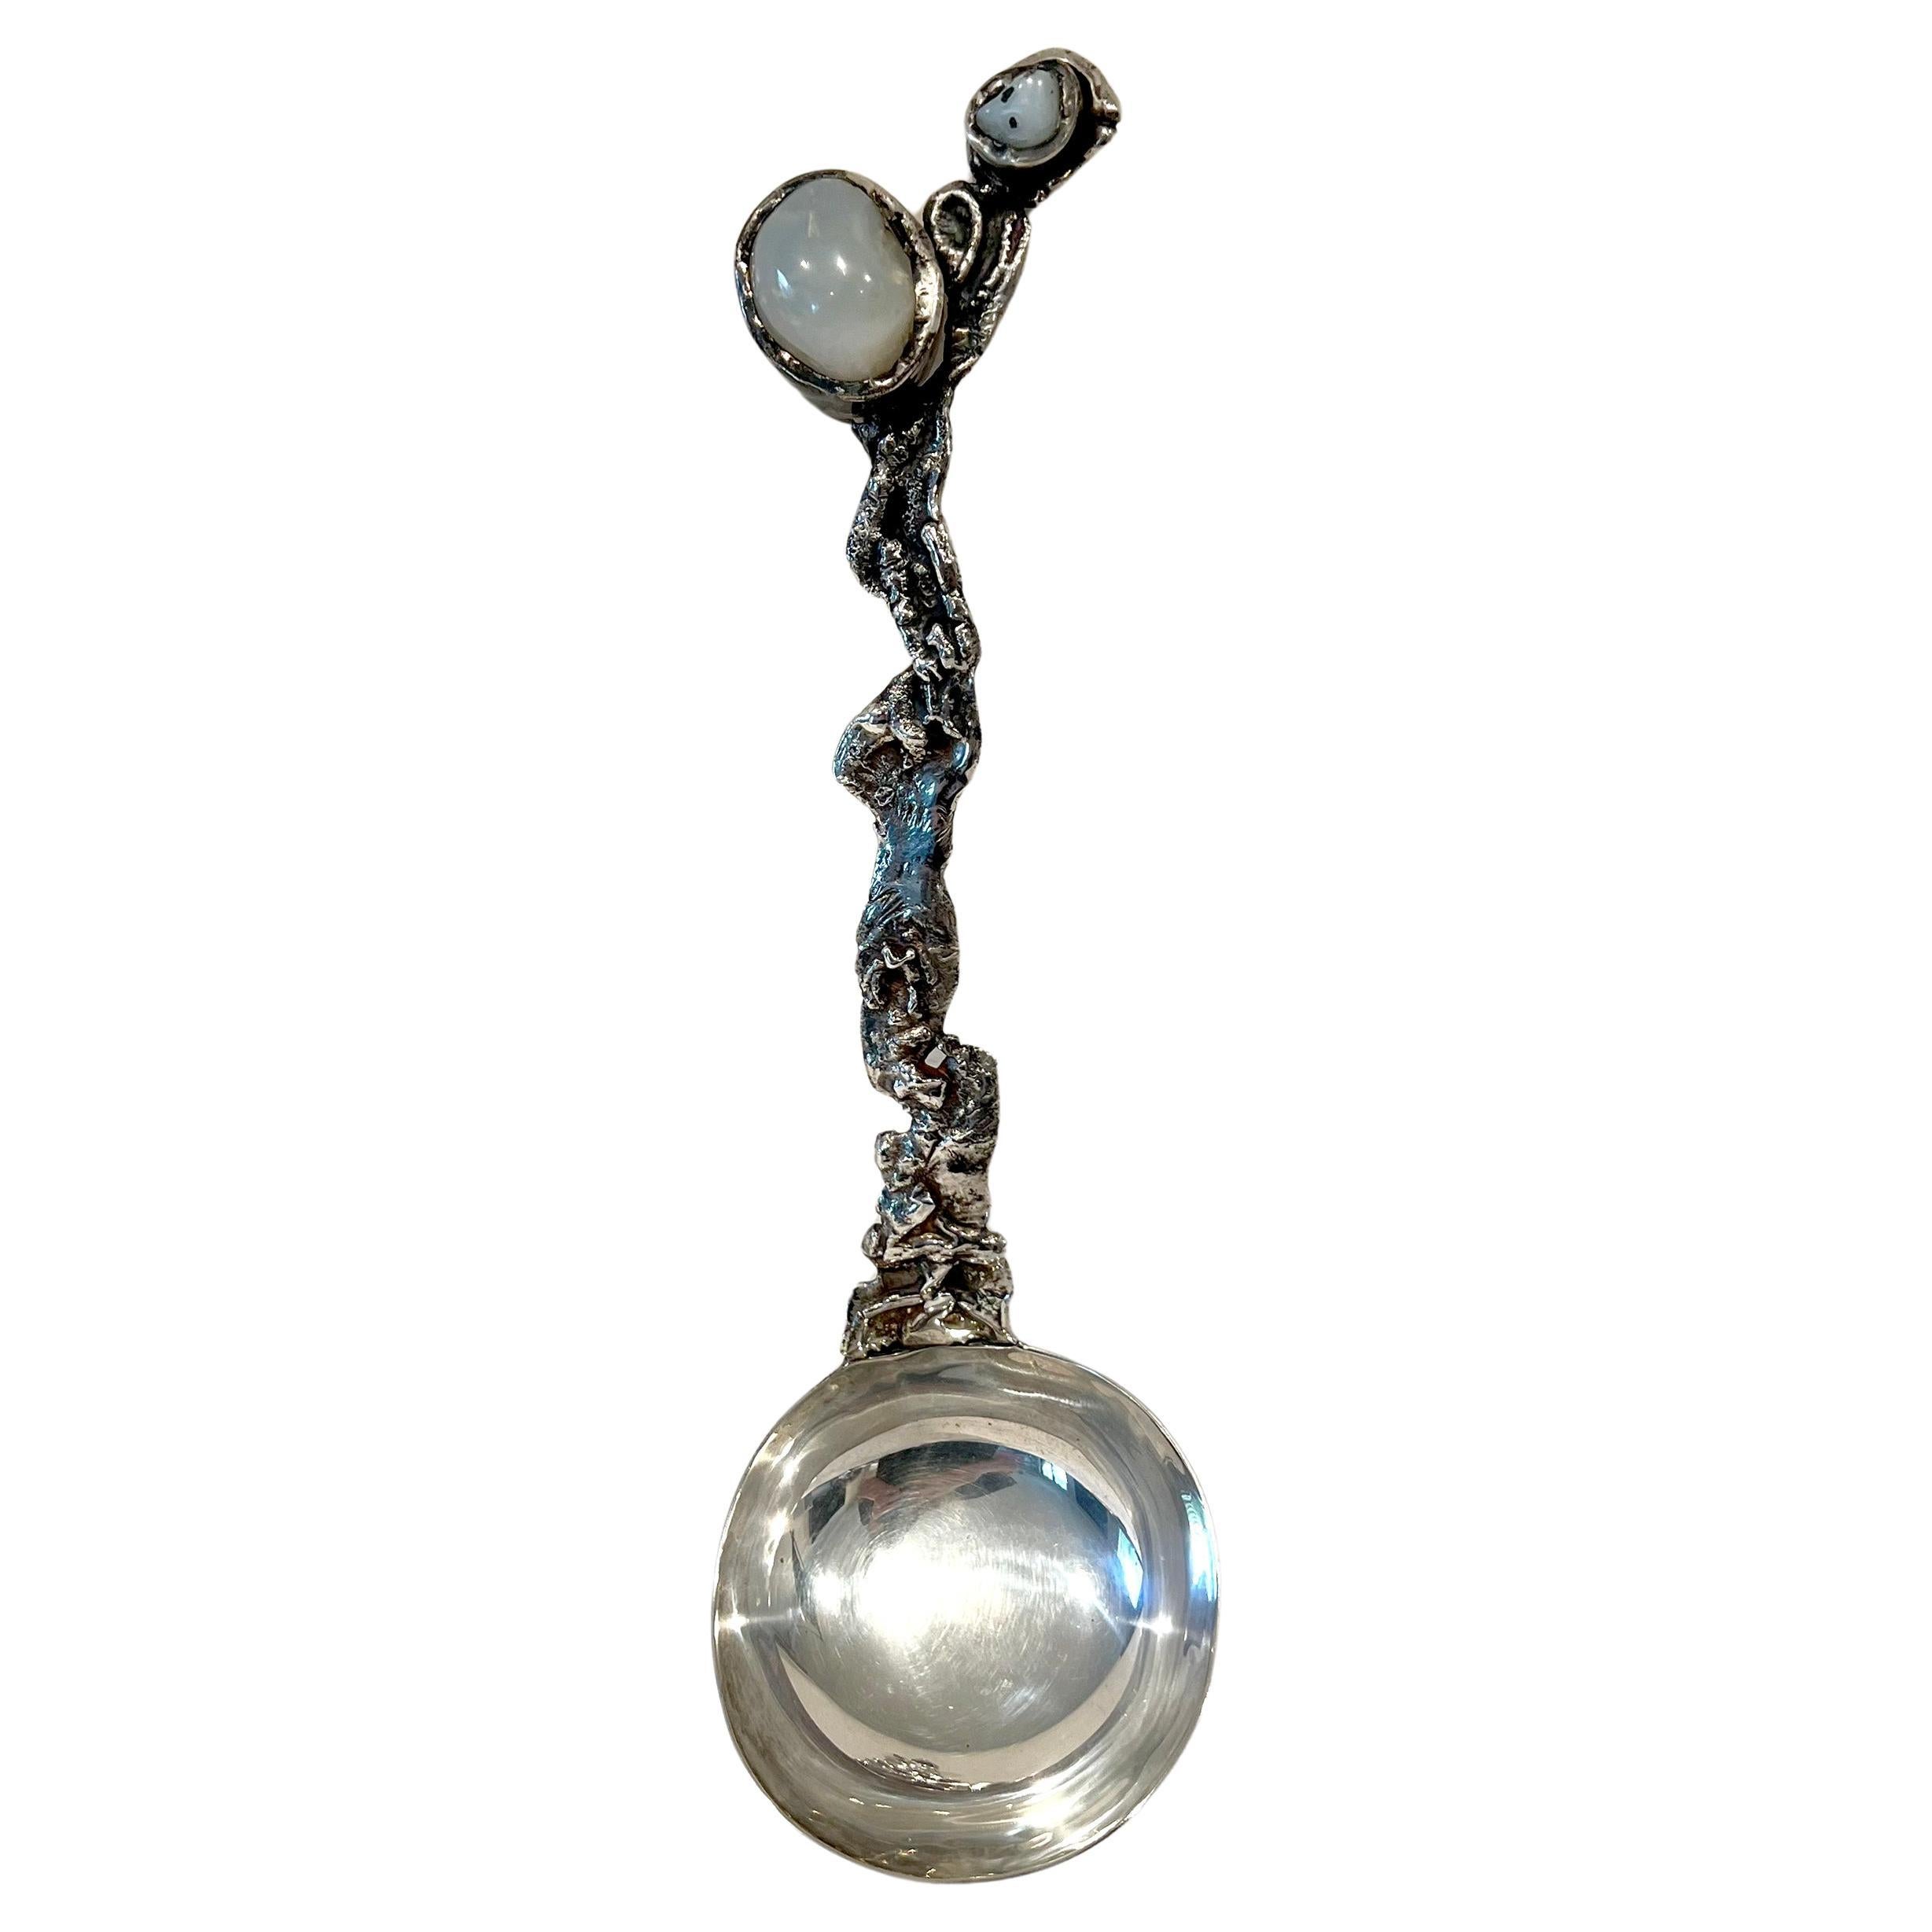 Brutalist sterling silver ladle spoon with milky agates created by Jens Peter Clausen Gudjonsson of Iceland, circa 1970s. Ladle measures 3.5